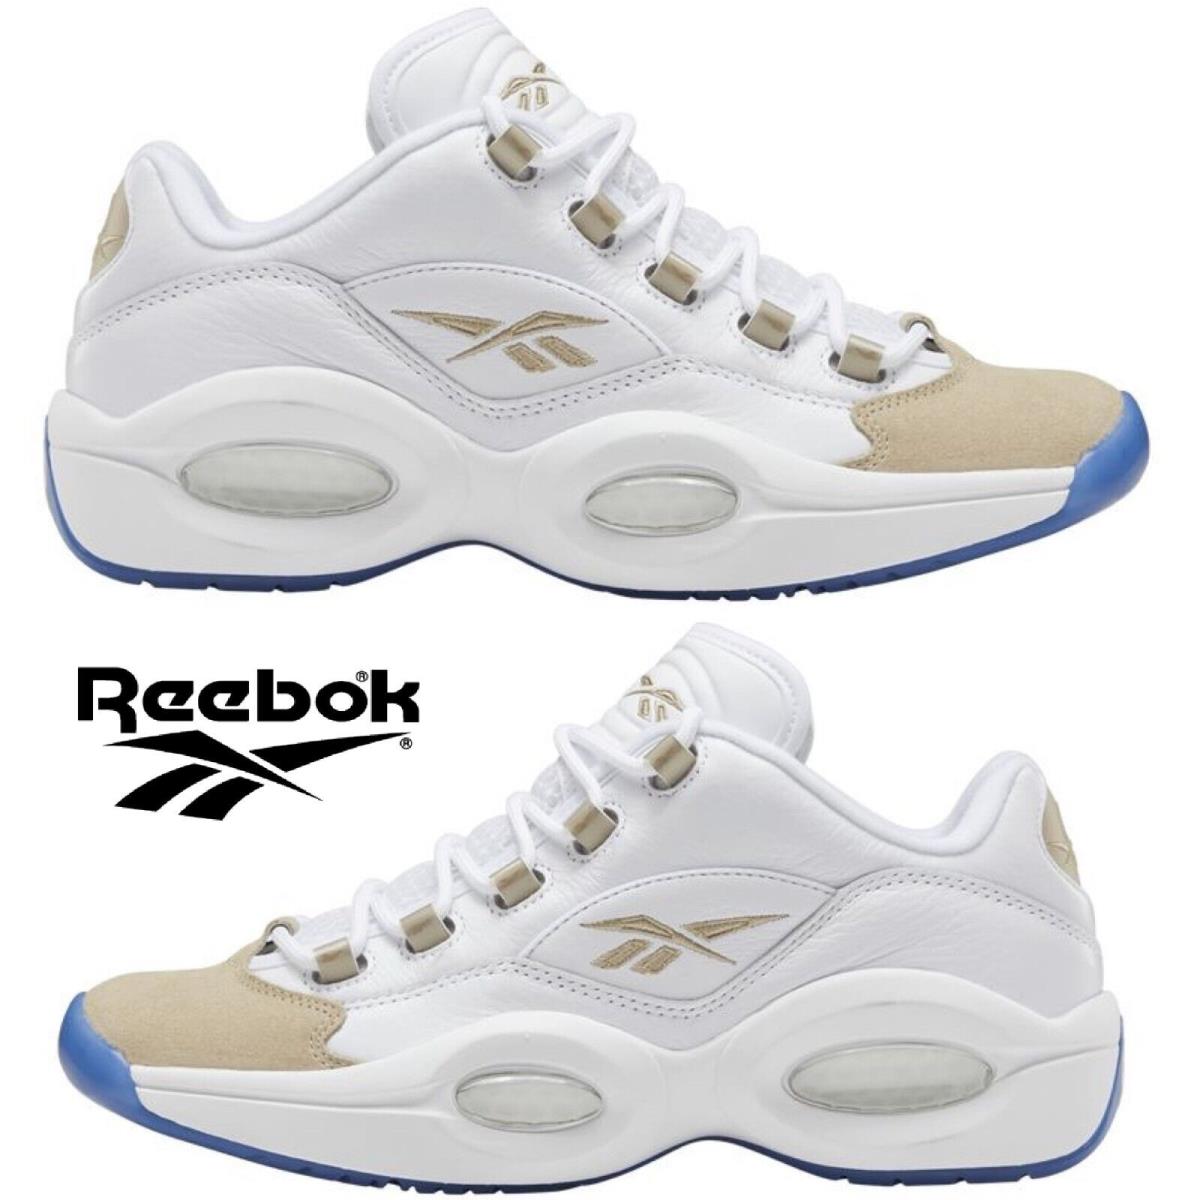 Reebok Question Low Basketball Shoes Men`s Sneakers Running Casual Sport White - White, Manufacturer: White/Beige